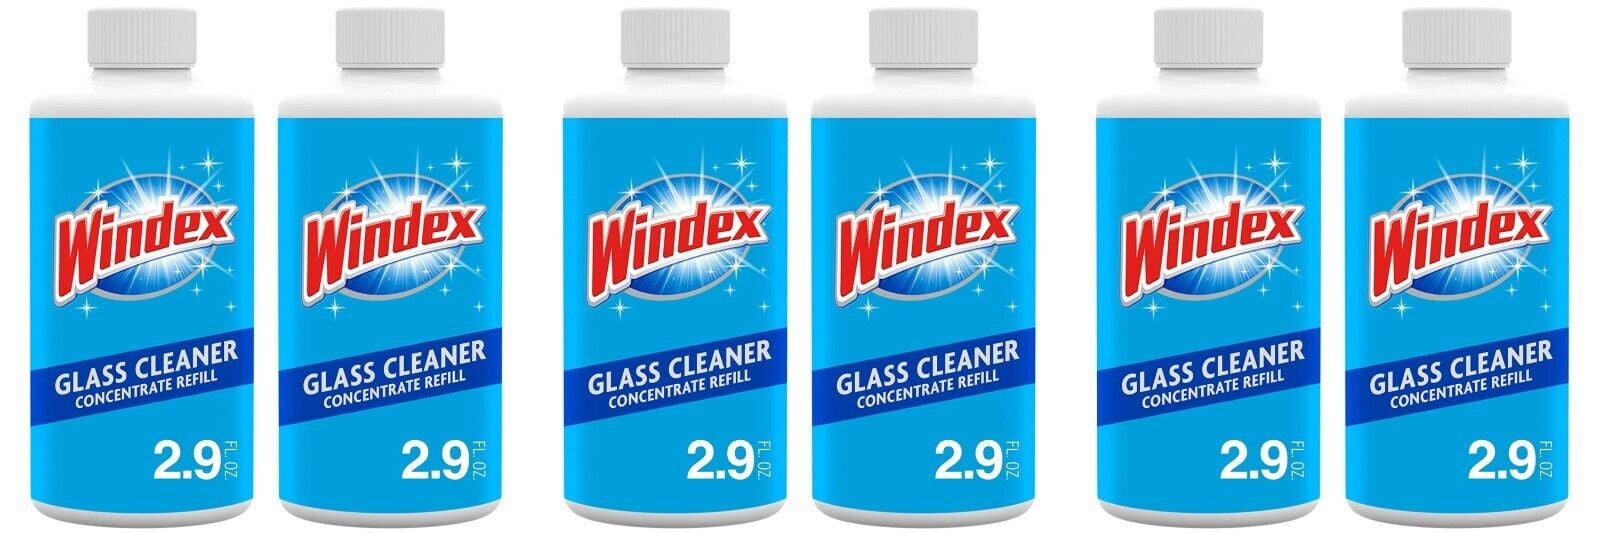 Windex Glass Cleaner - 4 gallons - Childcare Supply Company